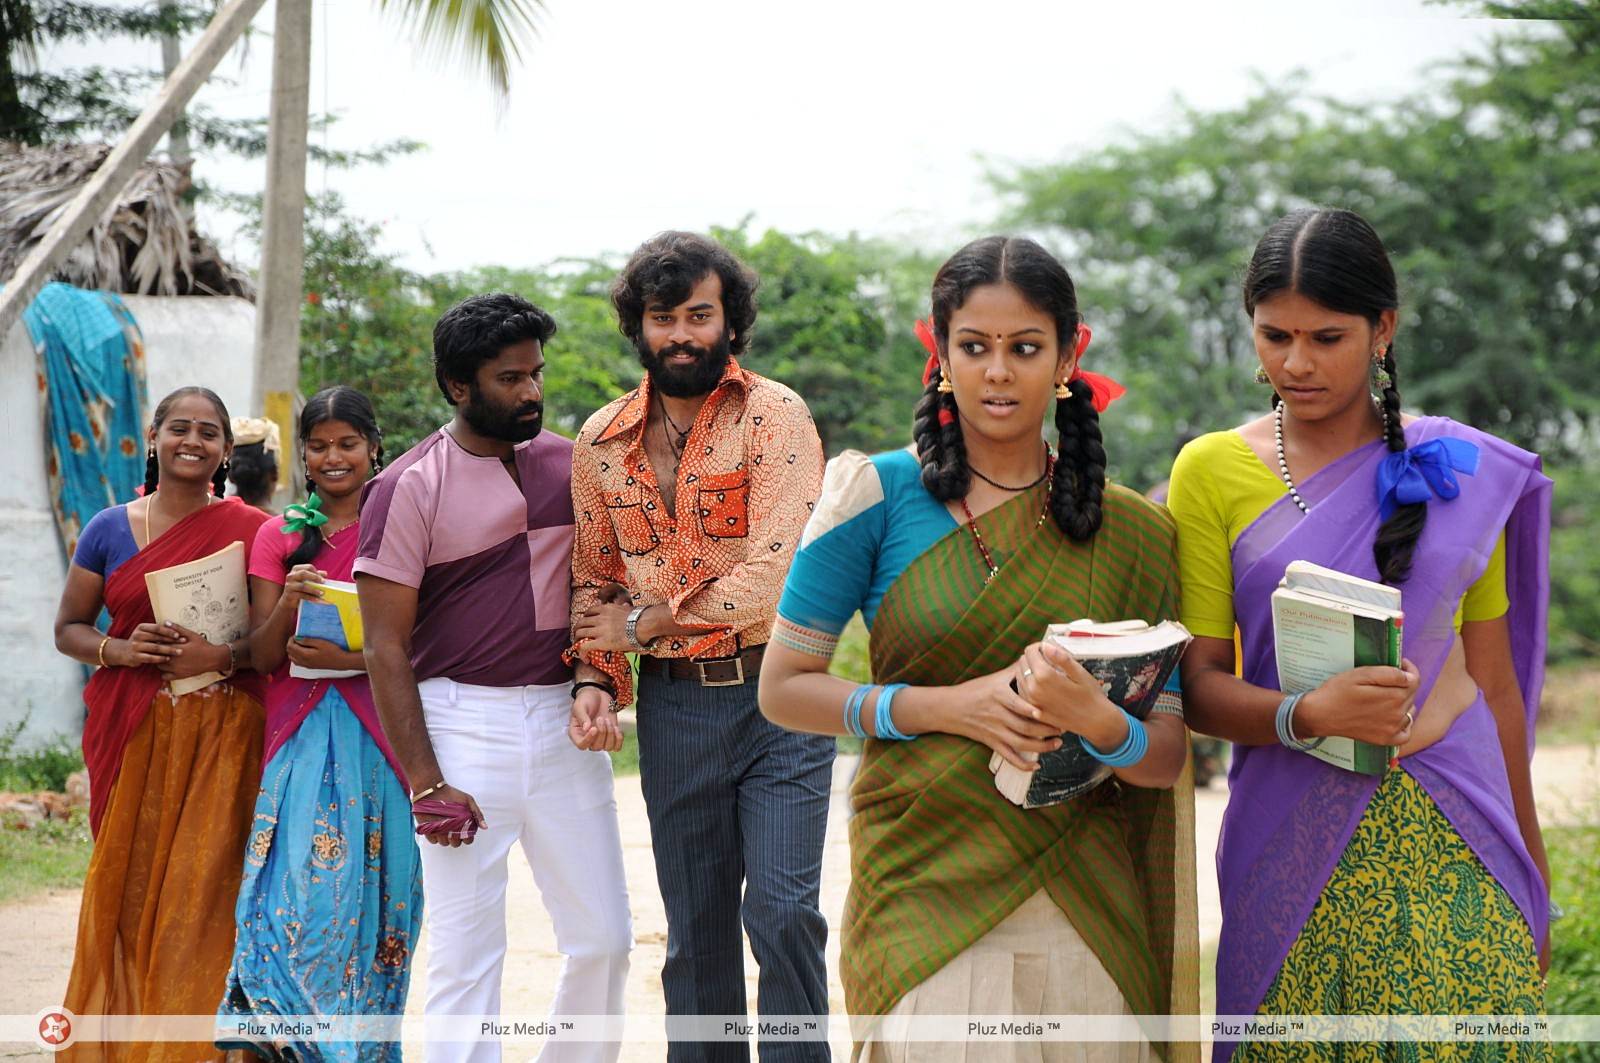 Kaali Charan Movie New Photos | Picture 428184